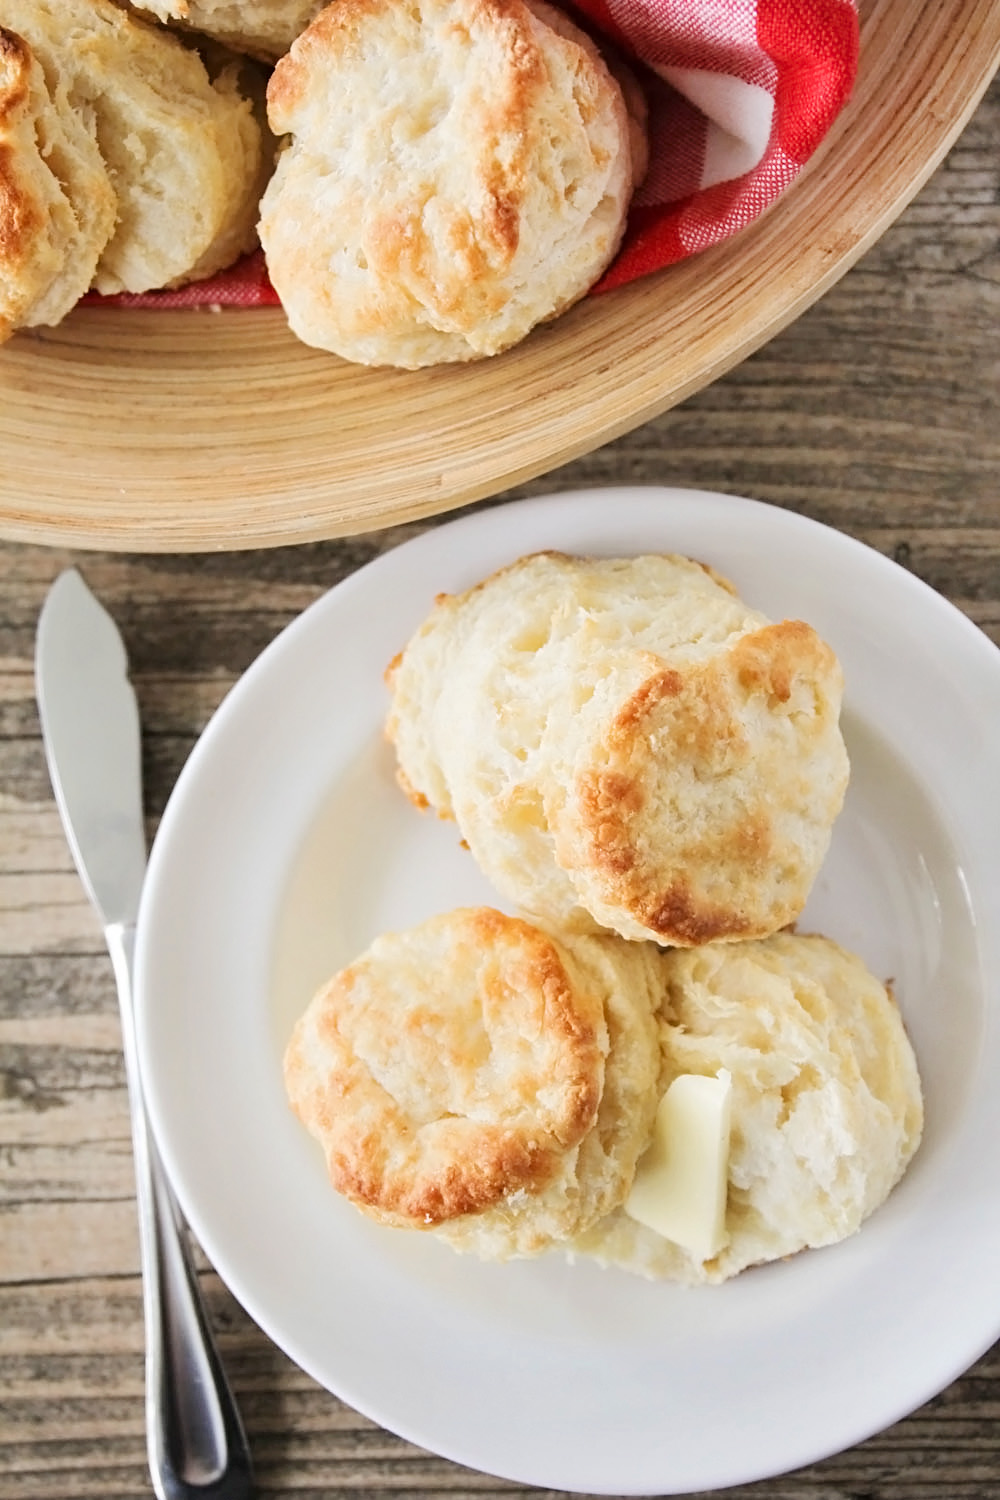 The best ever buttermilk biscuits - so light, fluffy, and melt-in-your-mouth tender. All the tips and tricks you need to make perfect biscuits every time!